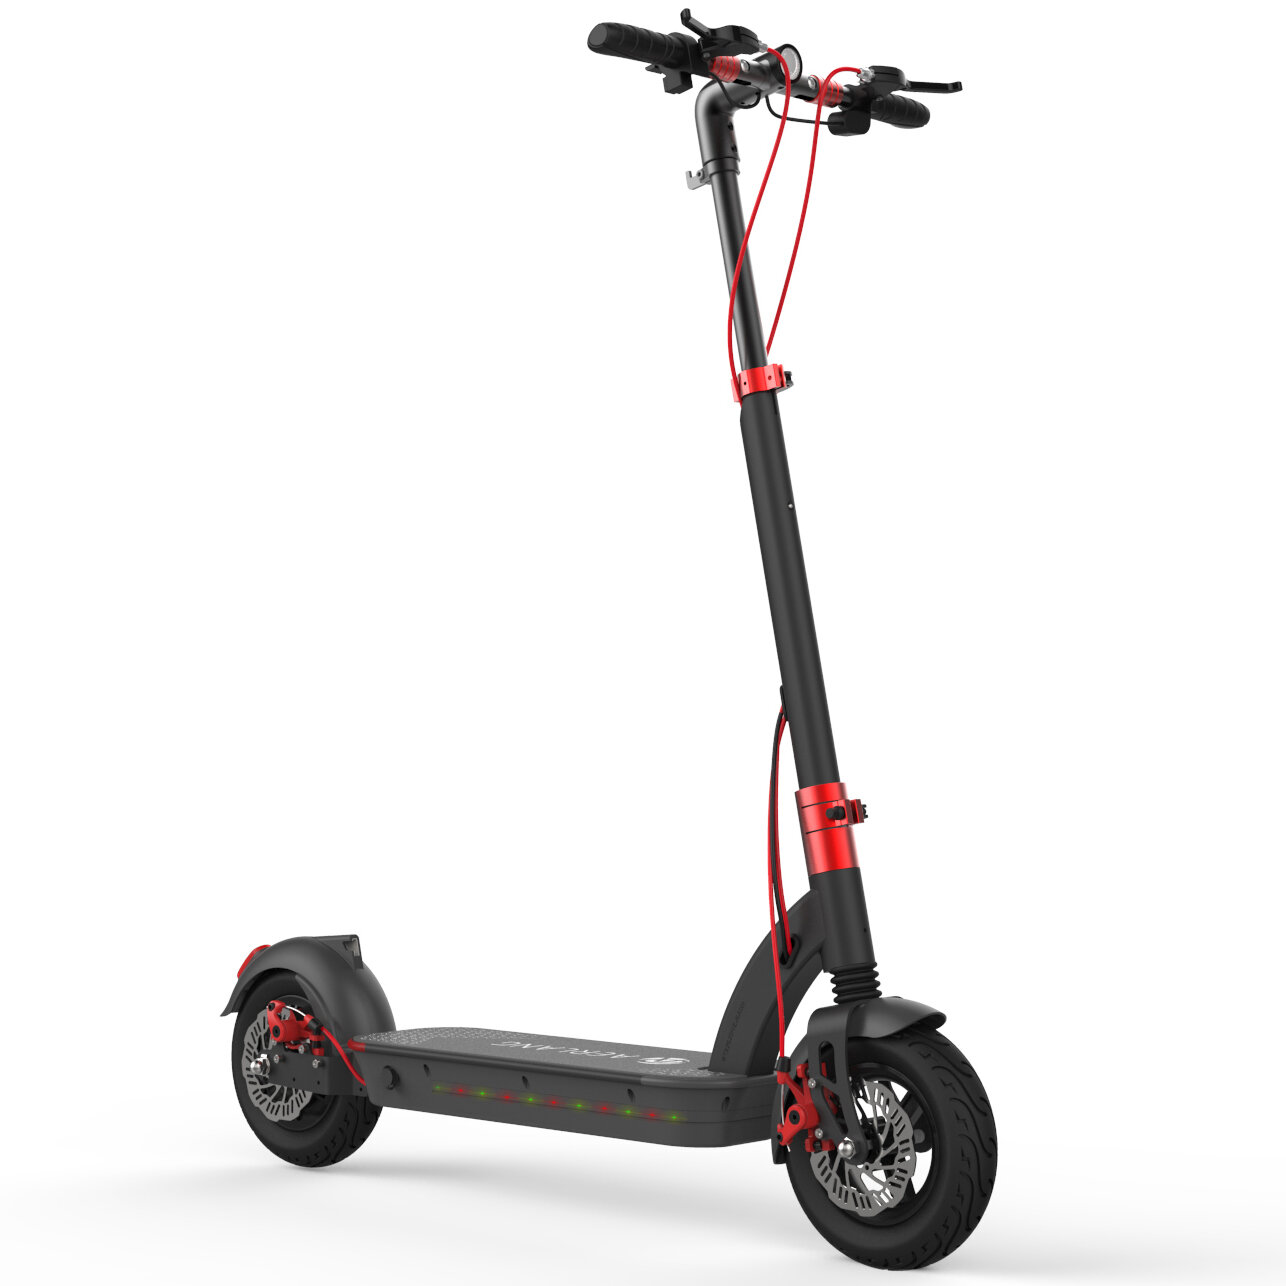 Aerlang H6 500W 48V 17.5A Folding Electric Scooter 10inch 40km/h Top Speed 50-60km Mileage Range Max. Load 120g Two Wheels Electric Scooter